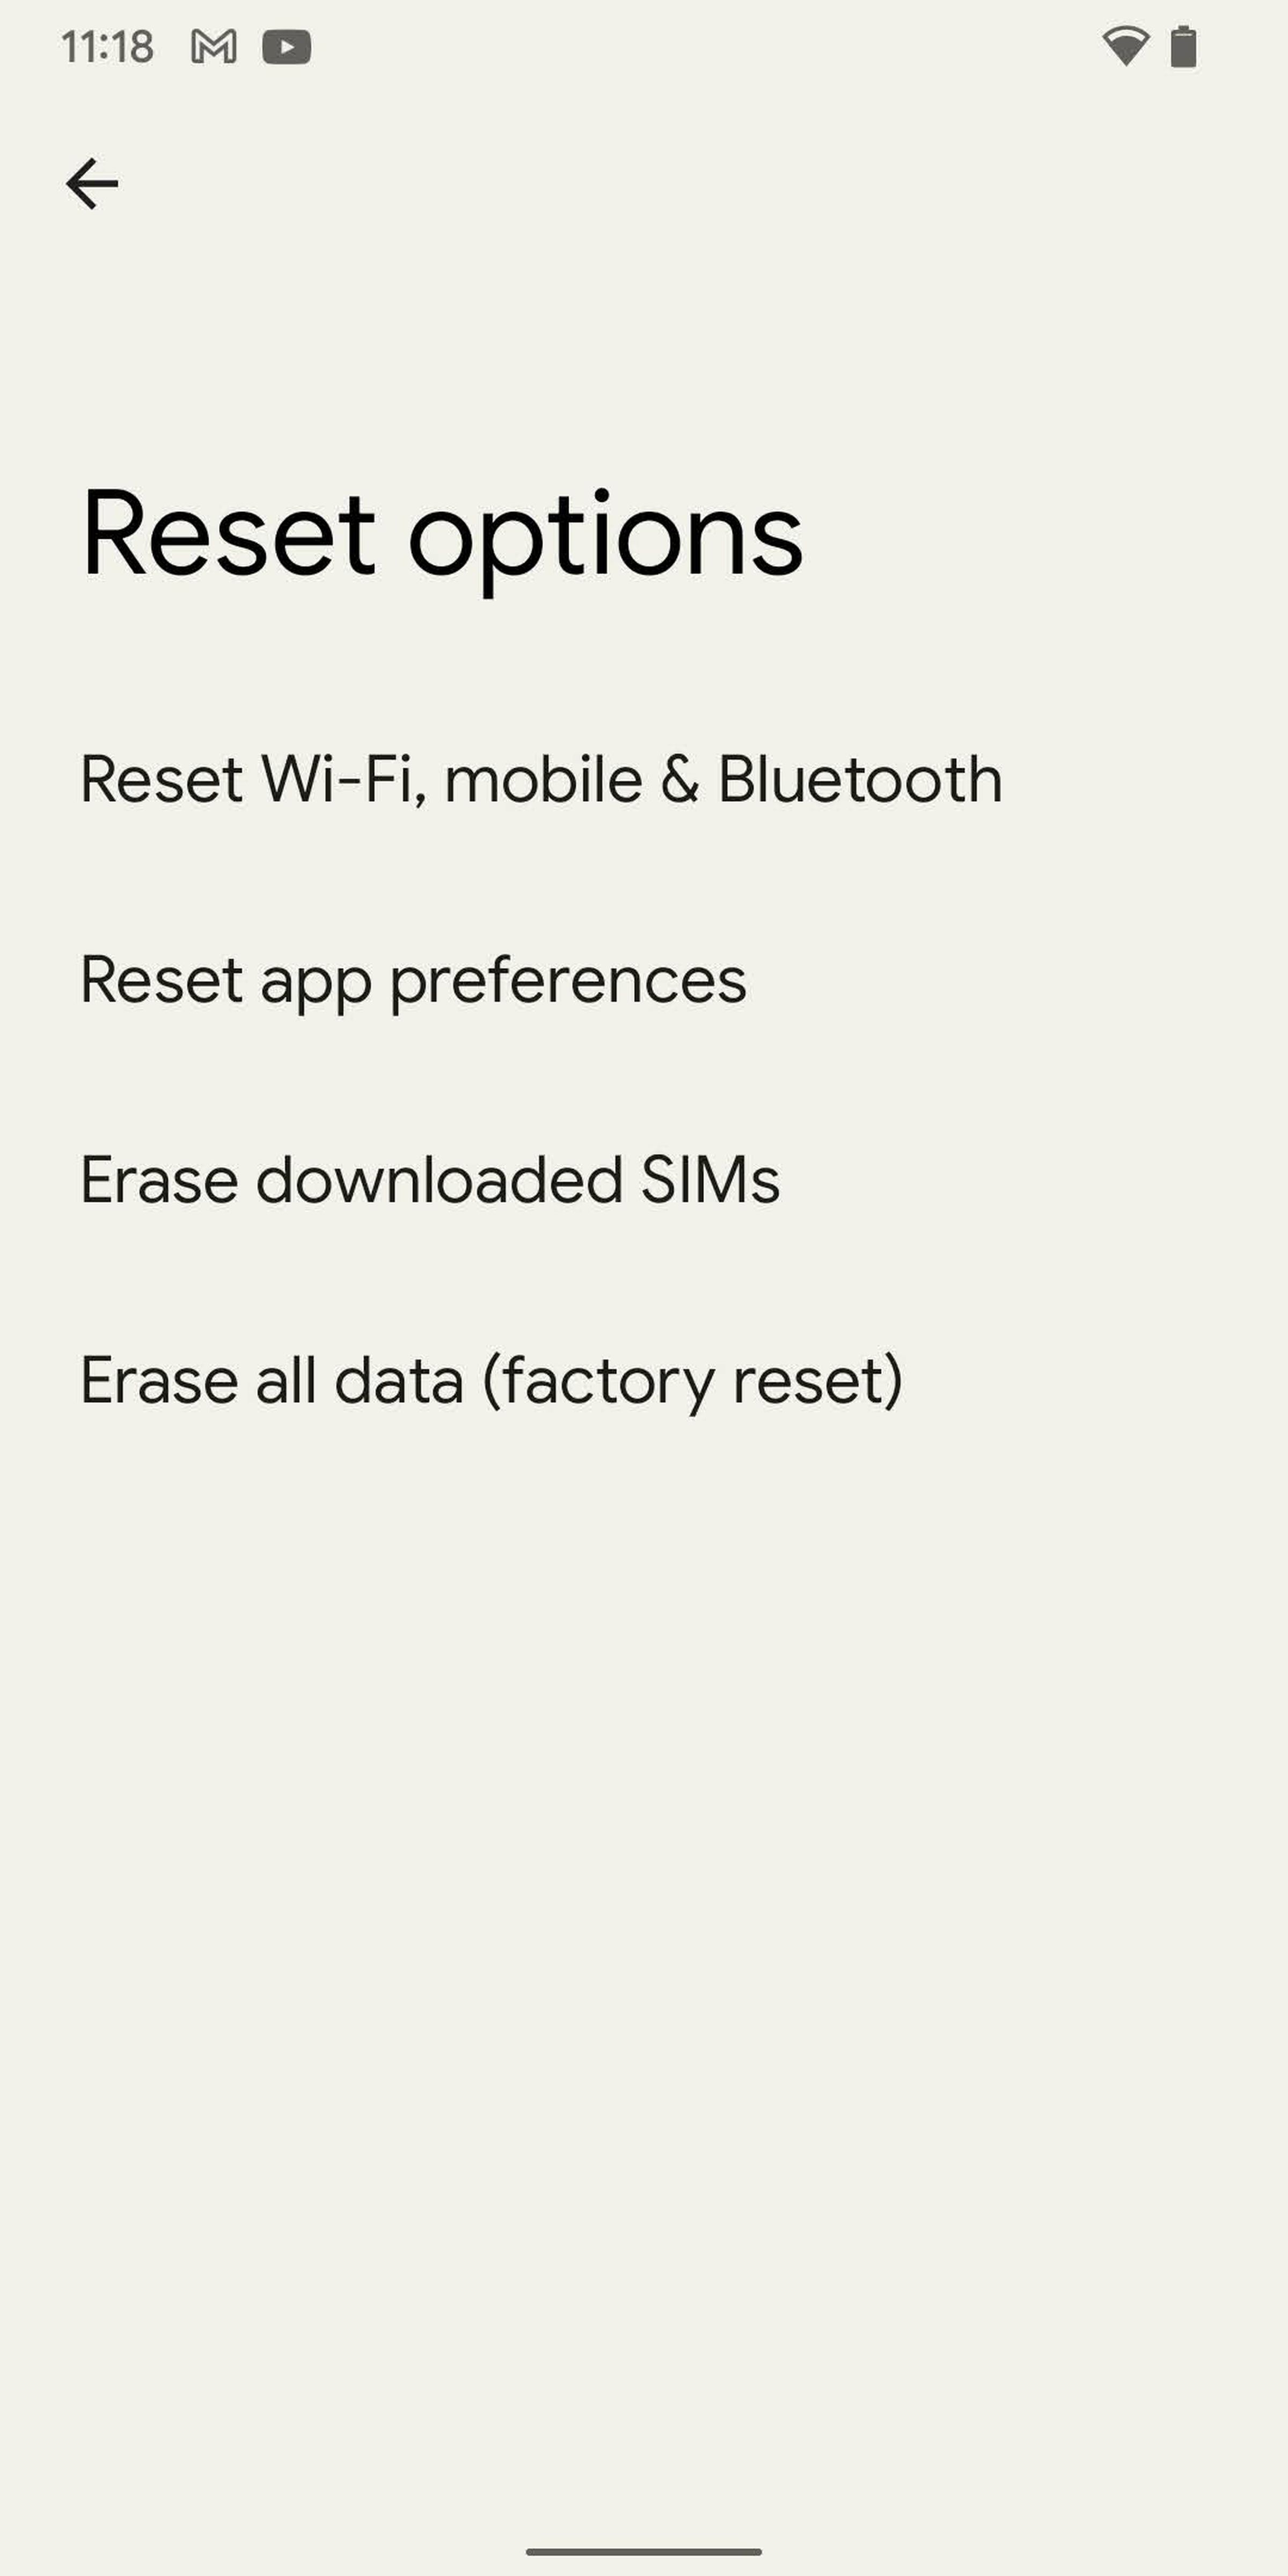 Reset options give you four choices.